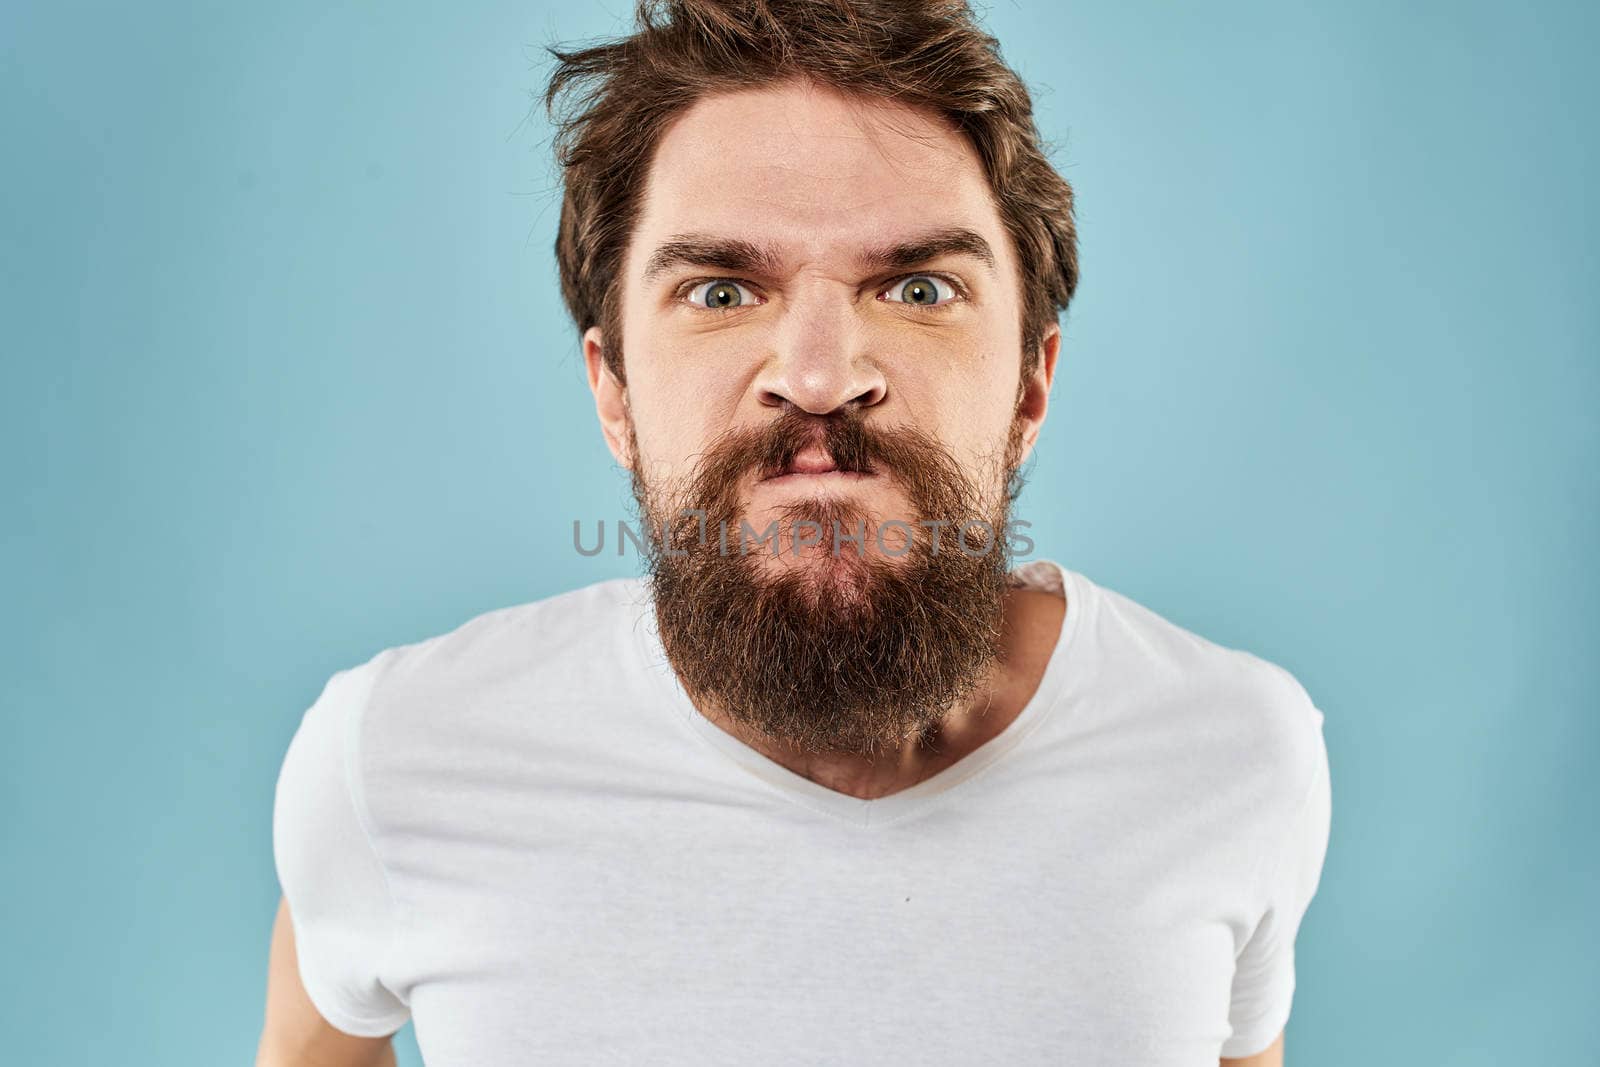 Man with disgruntled facial expression gesturing with hands studio lifestyle blue background by SHOTPRIME